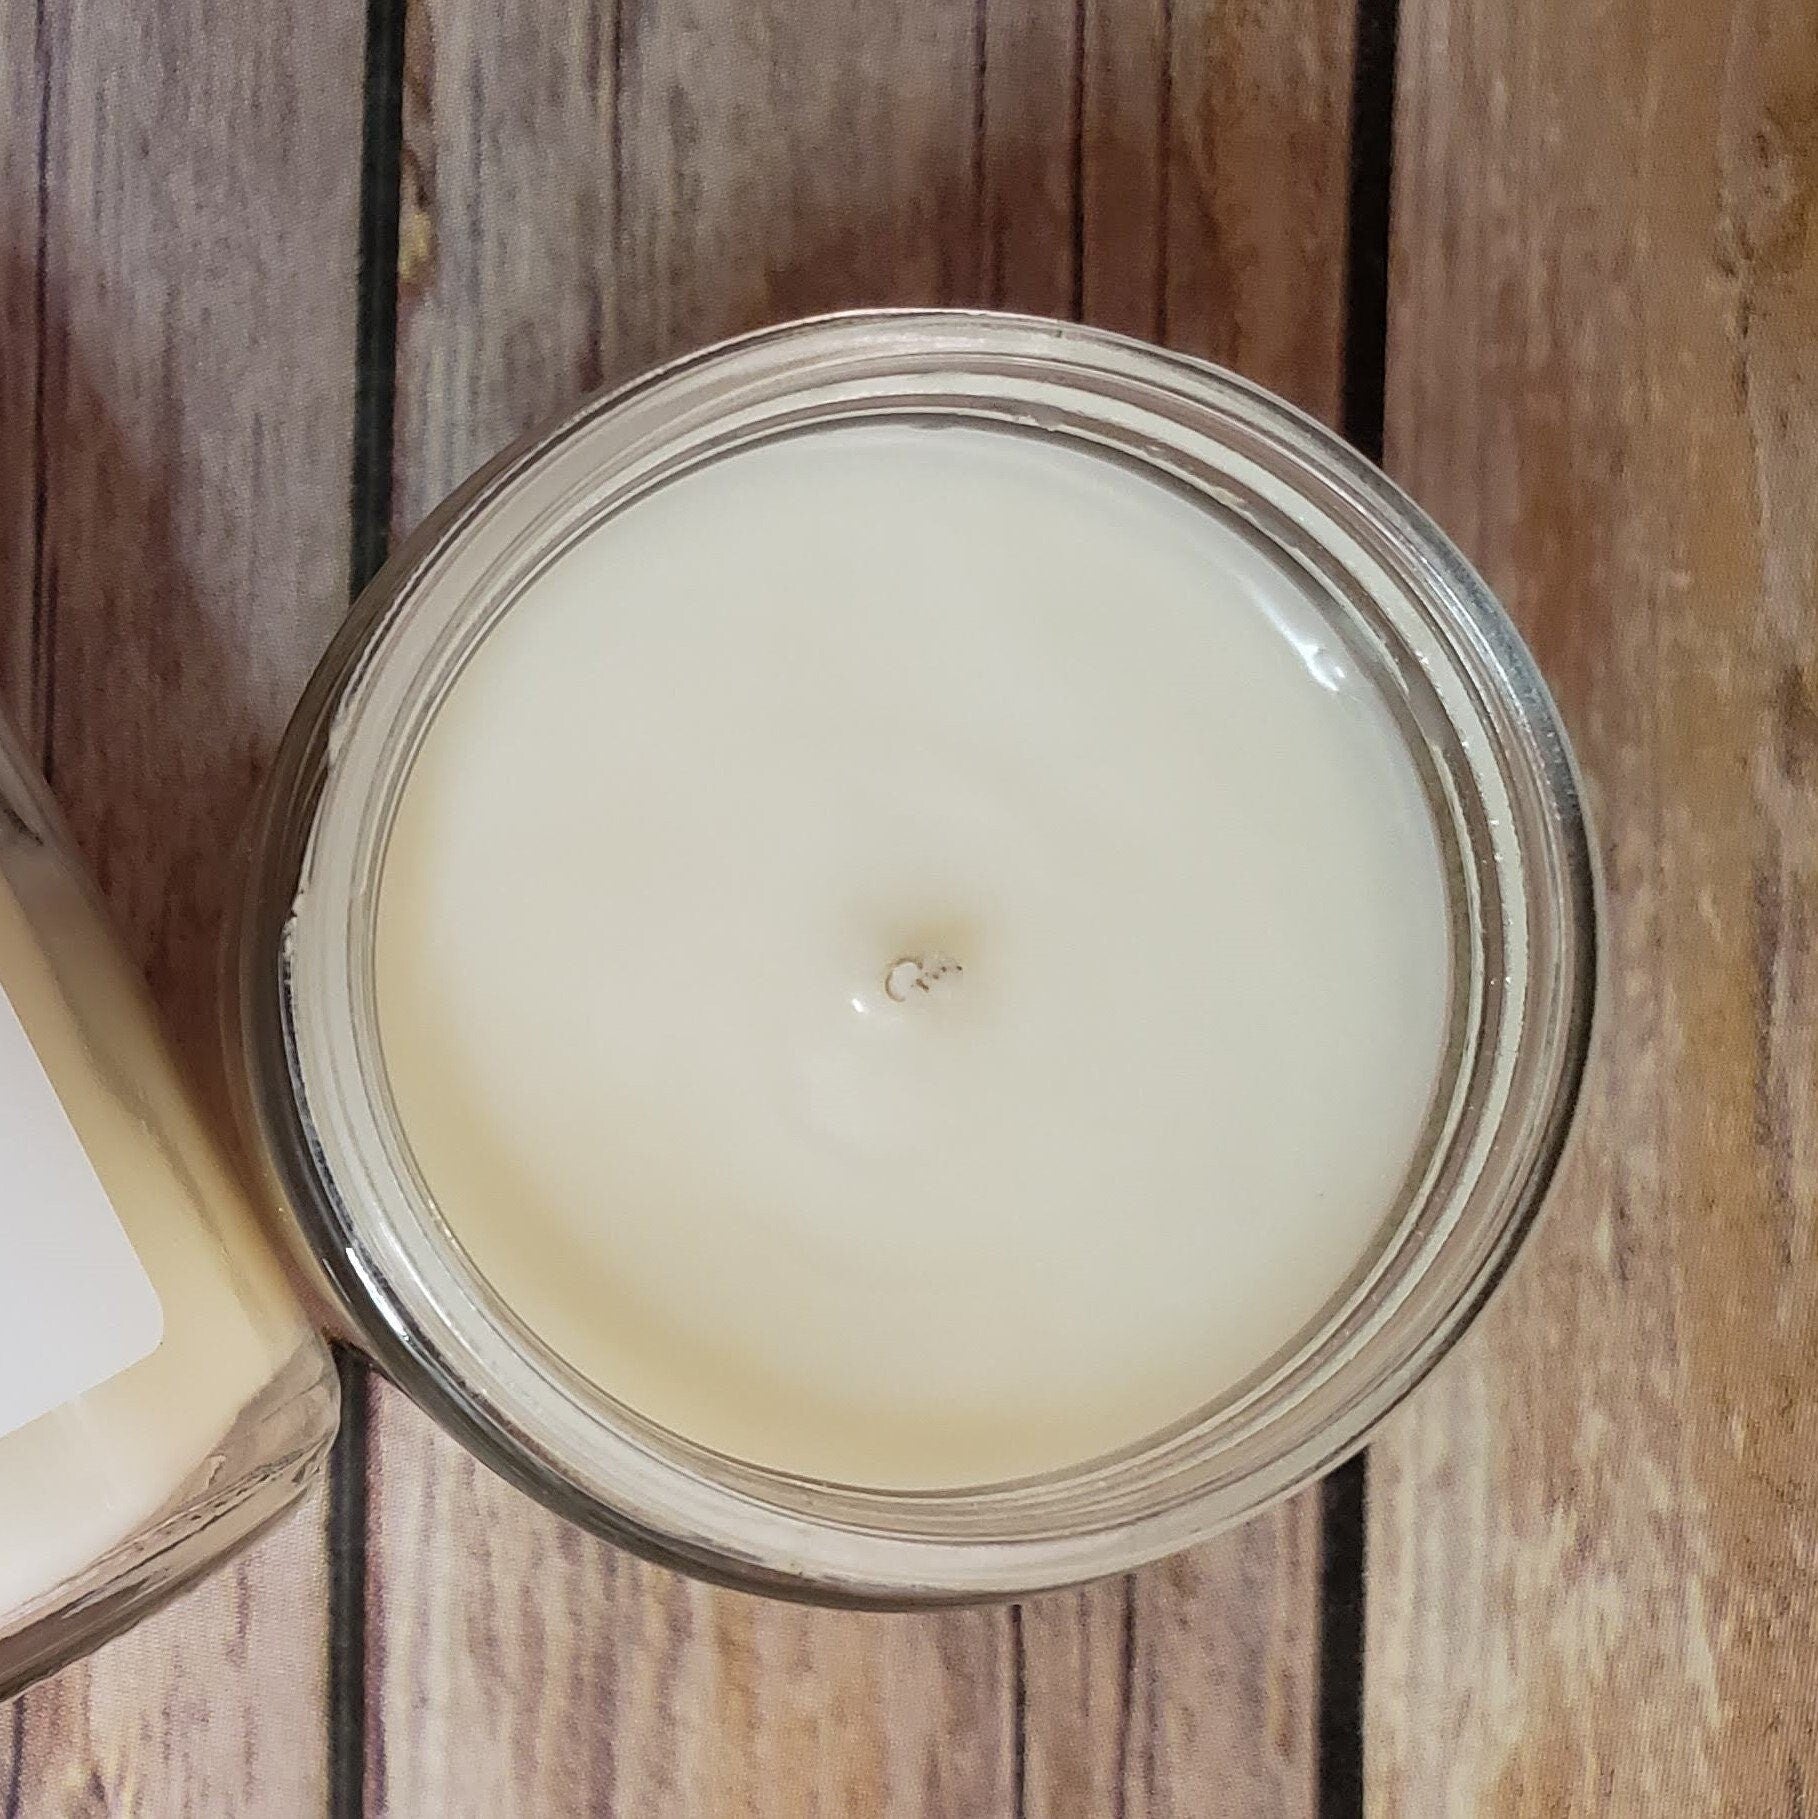 Ivy Creek No 33 | Himalayan Bamboo Soy Blend Candle | Hand Poured | 7 oz | Cotton Wick | Small Batch | Clean Burning | Container Candle